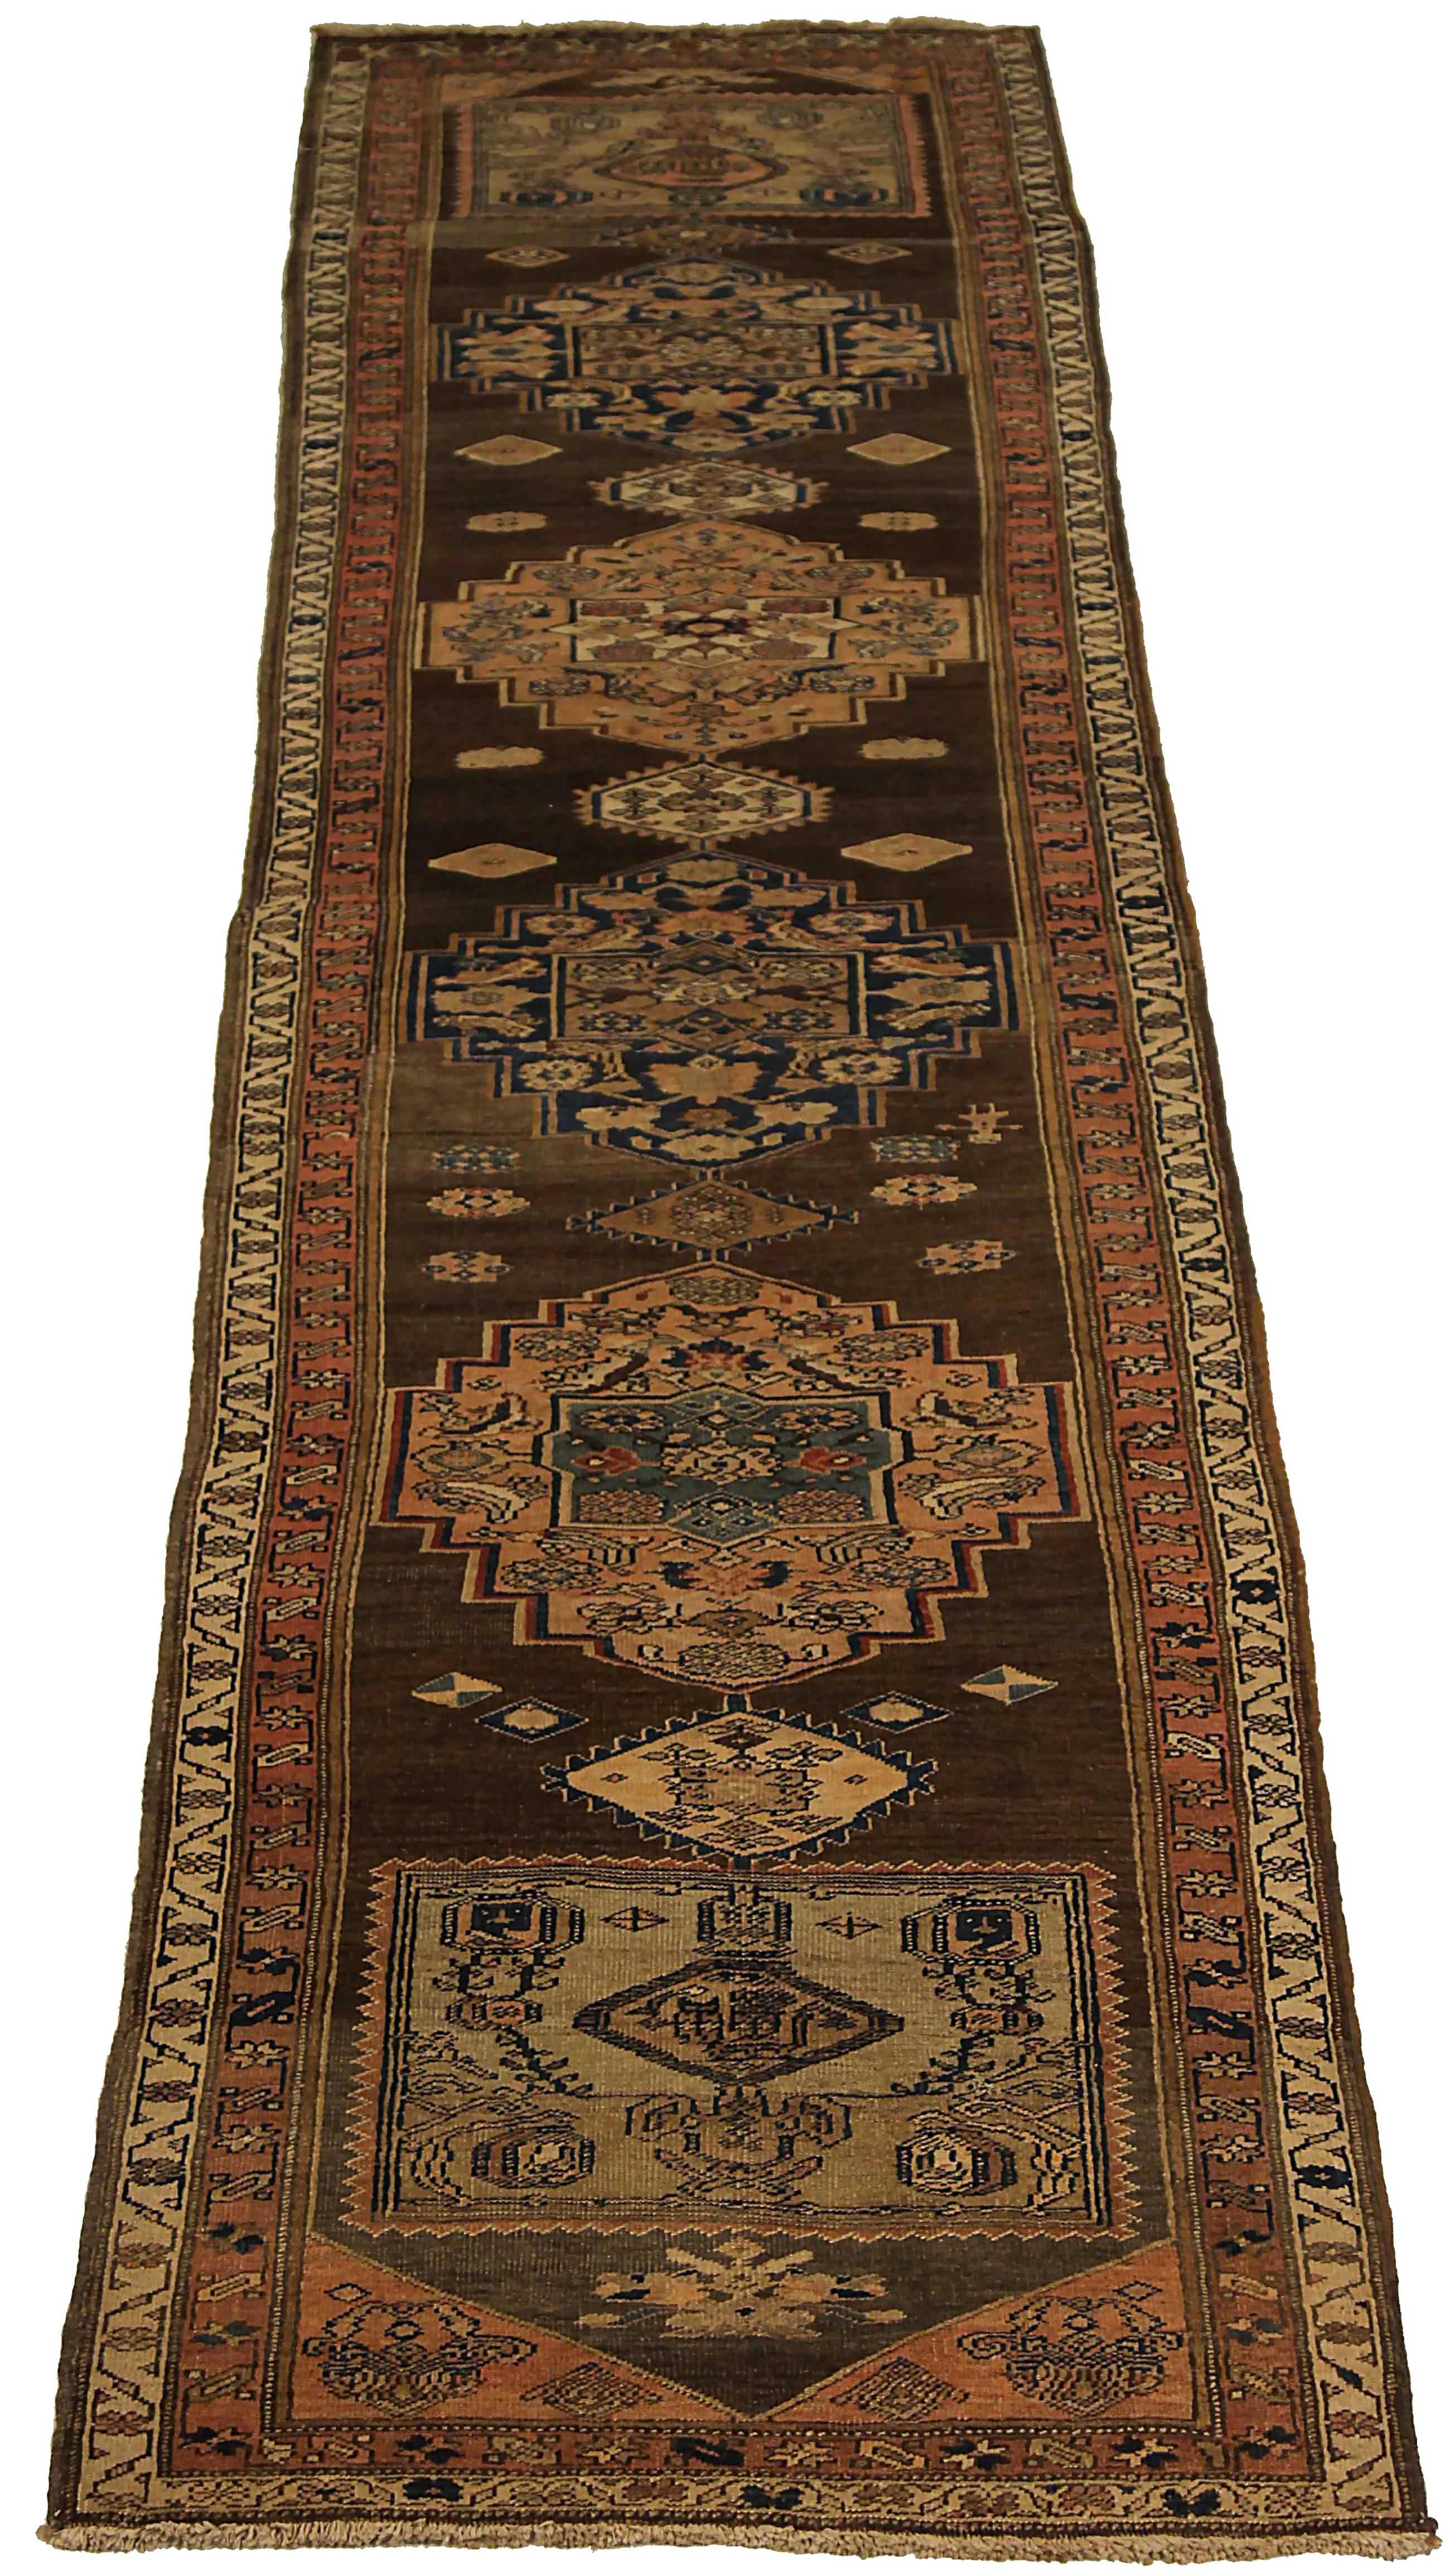 Antique Persian runner rug handwoven from the finest sheep’s wool. It’s colored with all-natural vegetable dyes that are safe for humans and pets. It’s a traditional Art Deco design handwoven by expert artisans. It’s a lovely runner rug that can be